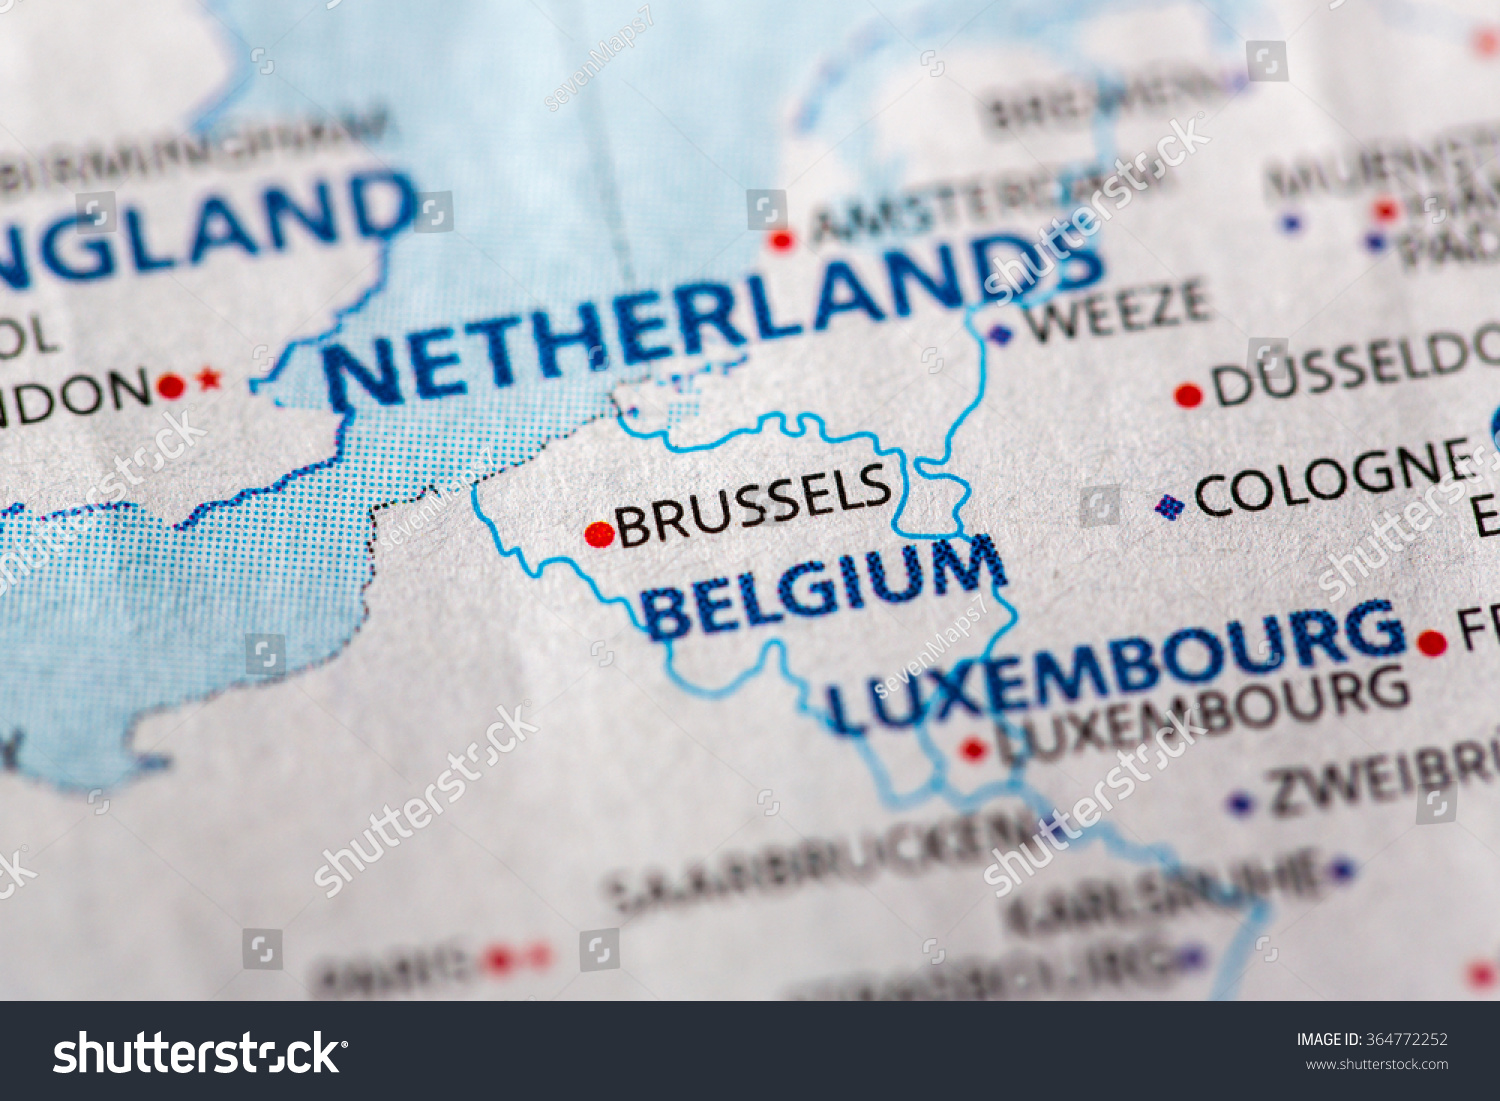 Closeup Of Brussels, Belgium On A Political Map Of Europe. Stock Photo ...